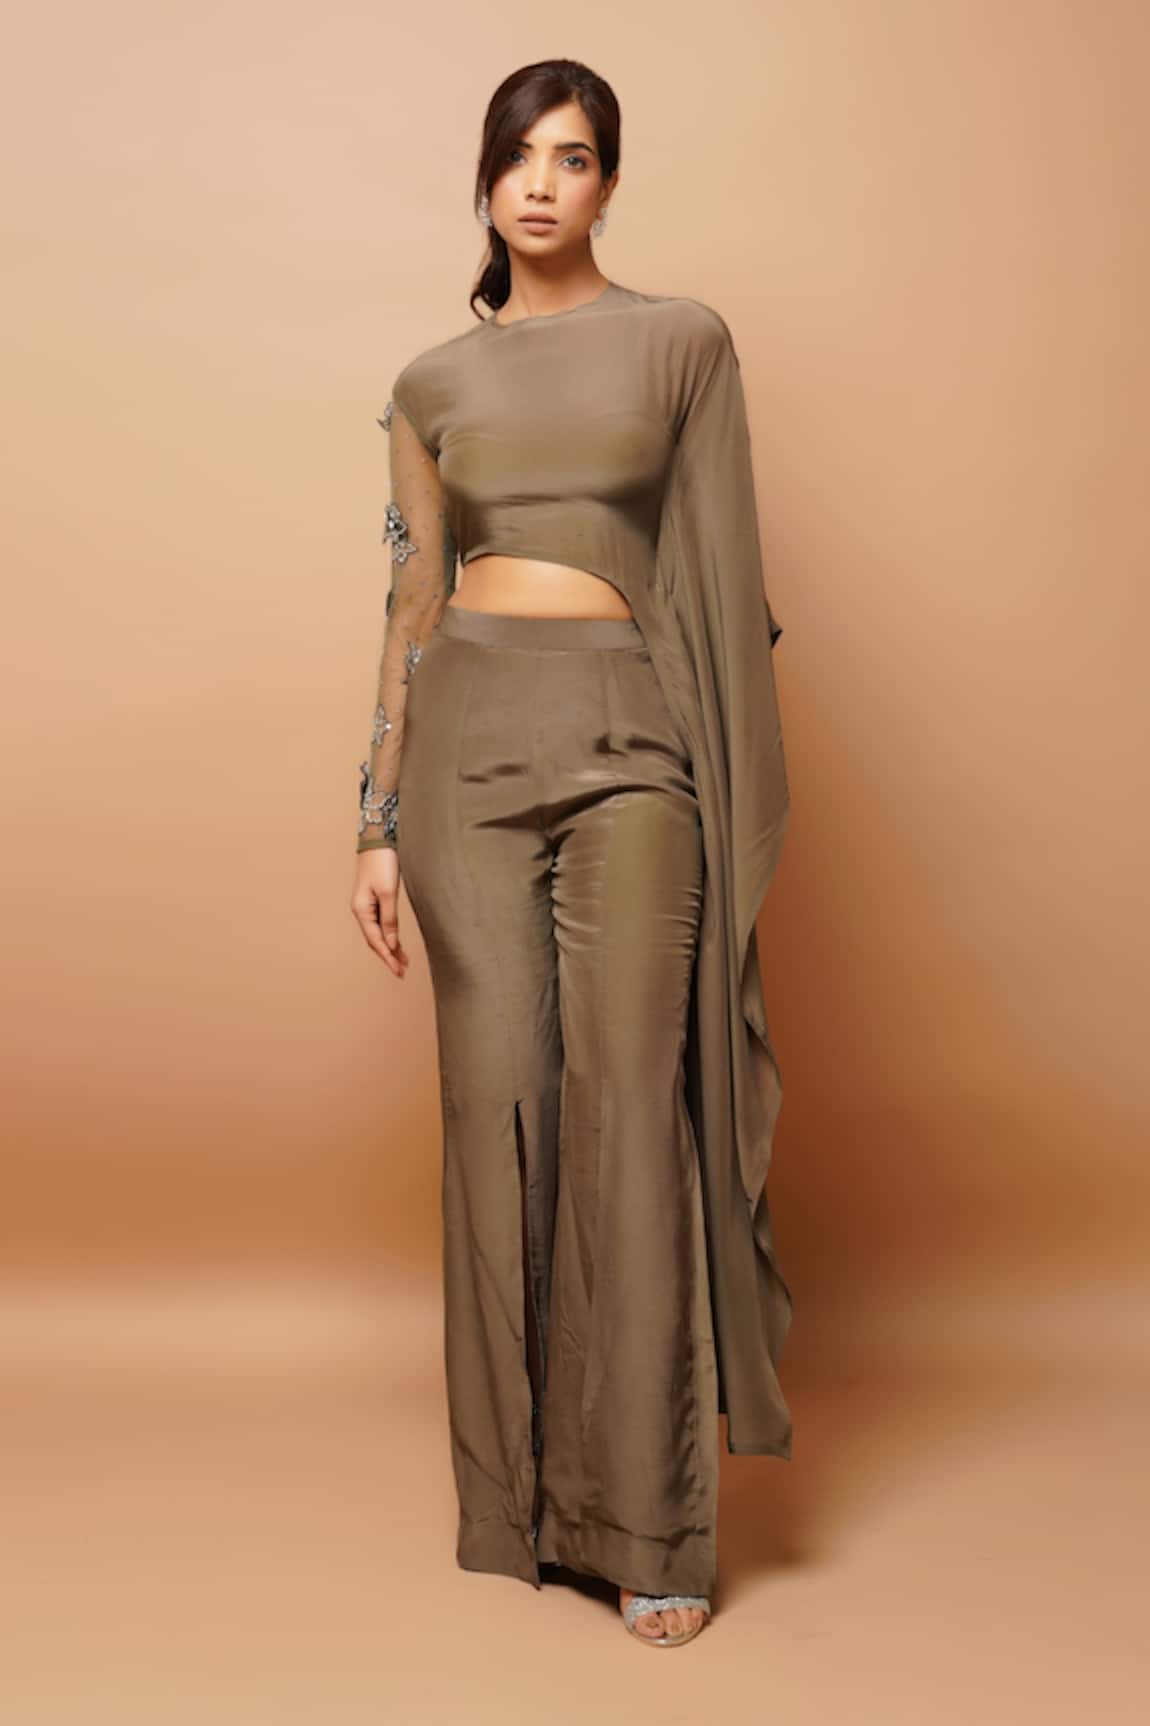 Ahi Clothing Asymmetric Embroidered Sleeve Top & Bell Bottoms Pant Set